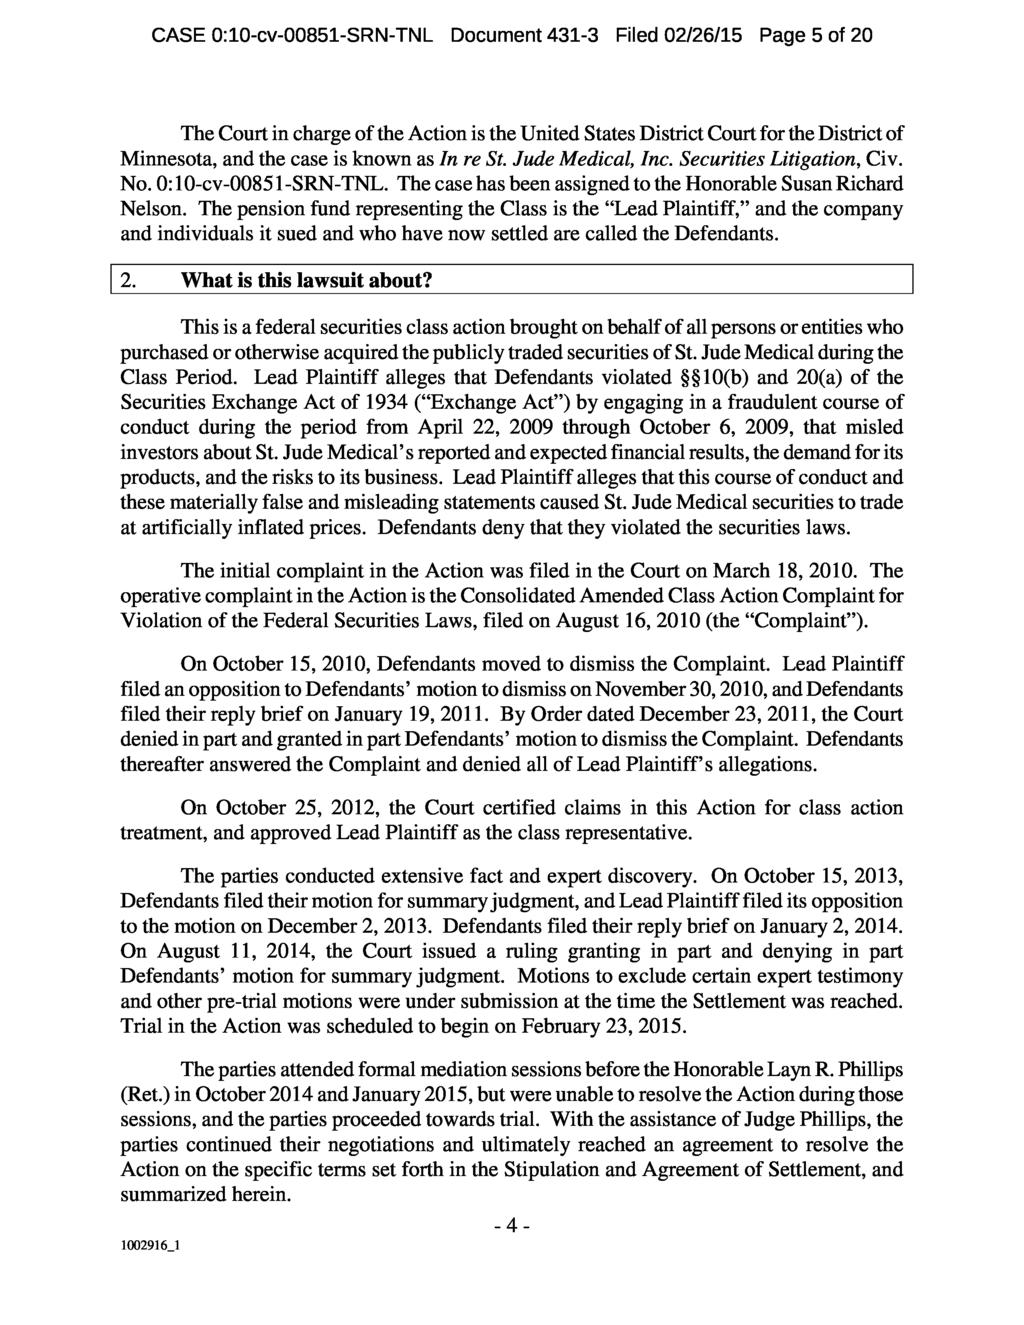 CASE 0:10-cv-00851-SRN-TNL Document 431-3 Filed 02/26/15 Page 5 of 20 The Court in charge of the Action is the United States District Court for the District of Minnesota, and the case is known as In